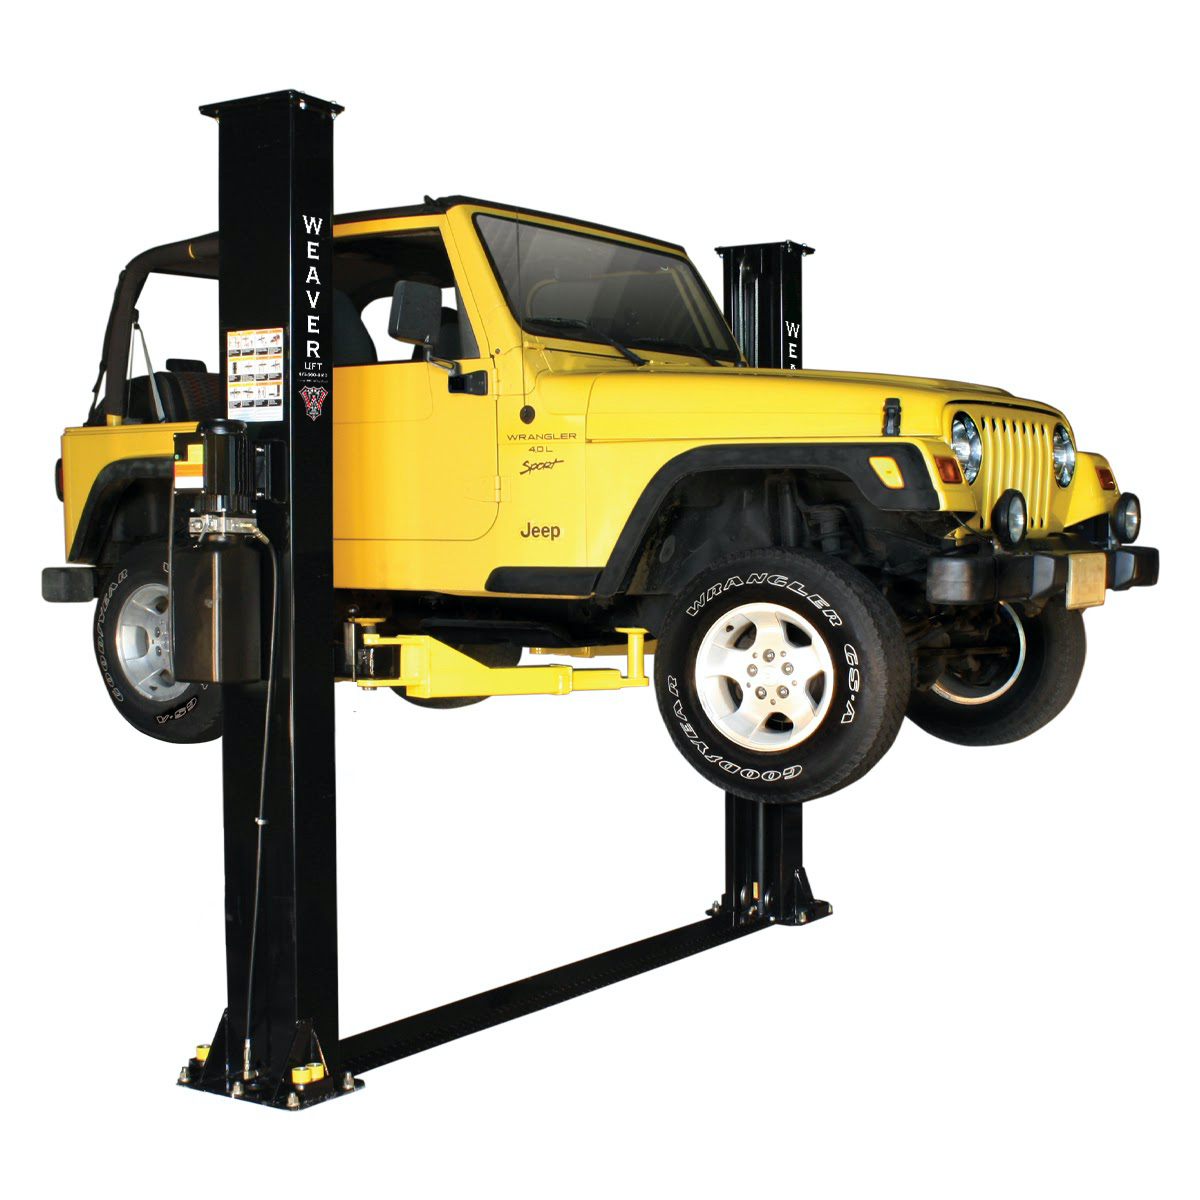 Set of 2 - 3 Tall Solid Rubber Stack Blocks for Any Auto Lift